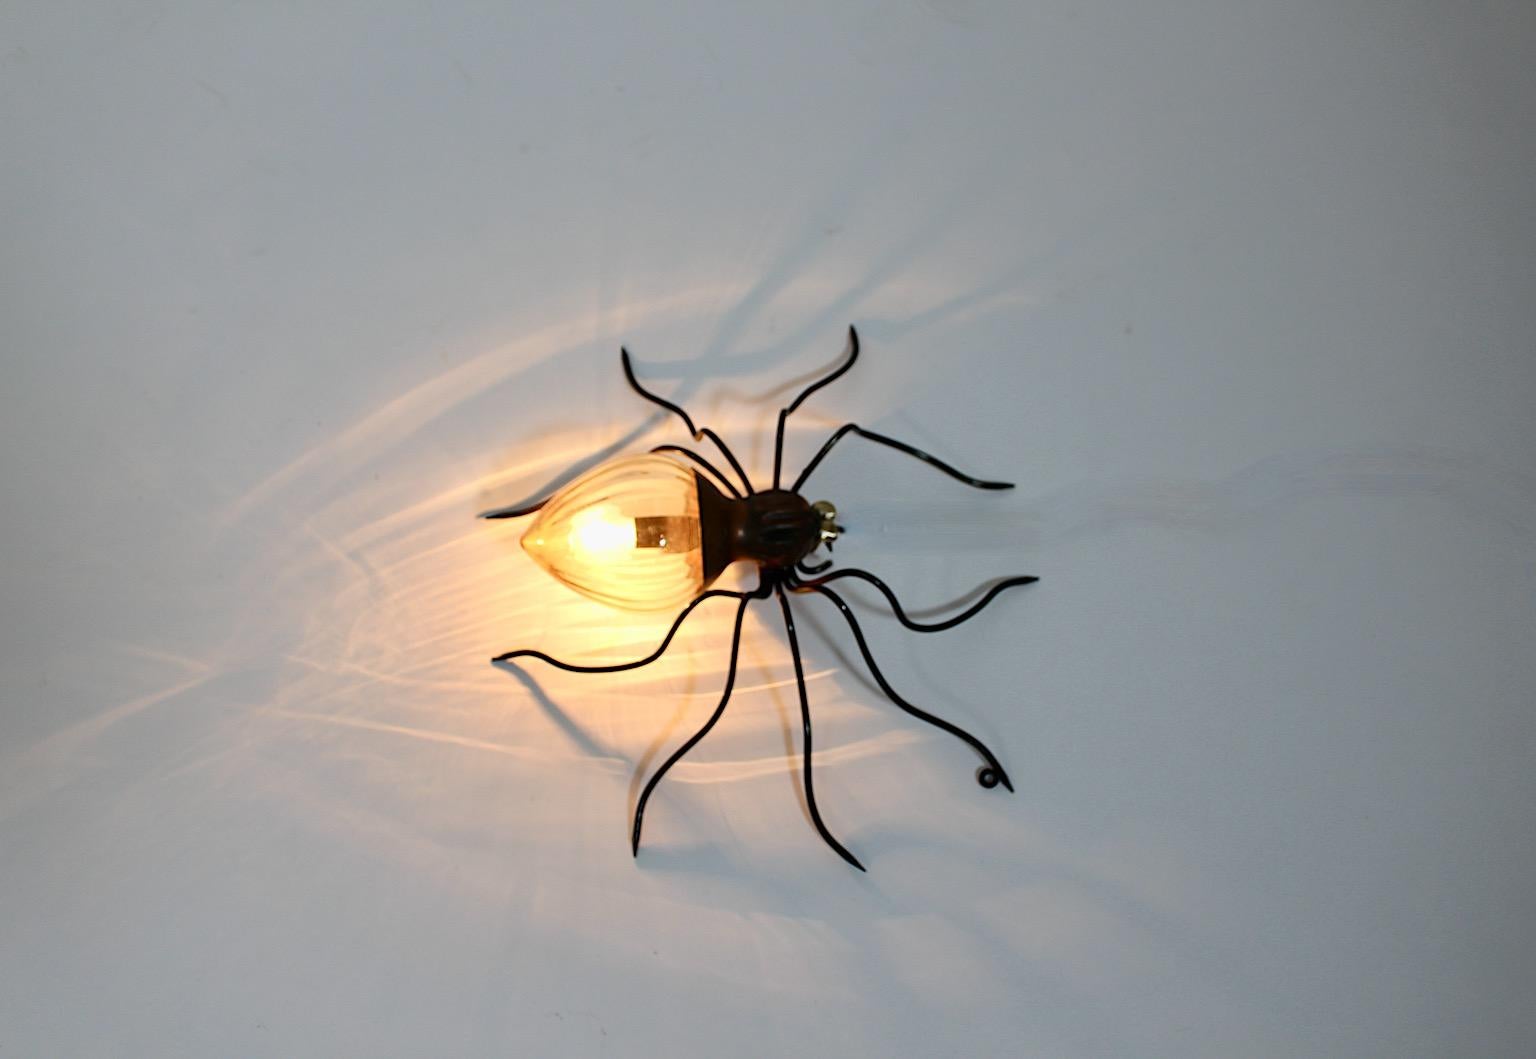 Mid Century Modern vintage spider like sconce or wall light from black metal, brass copper and yellow structured glass, 1950s Italy.
An amazing sconce or wall light with whimsical flair from yellow structured glass, black metal, brass and copper.